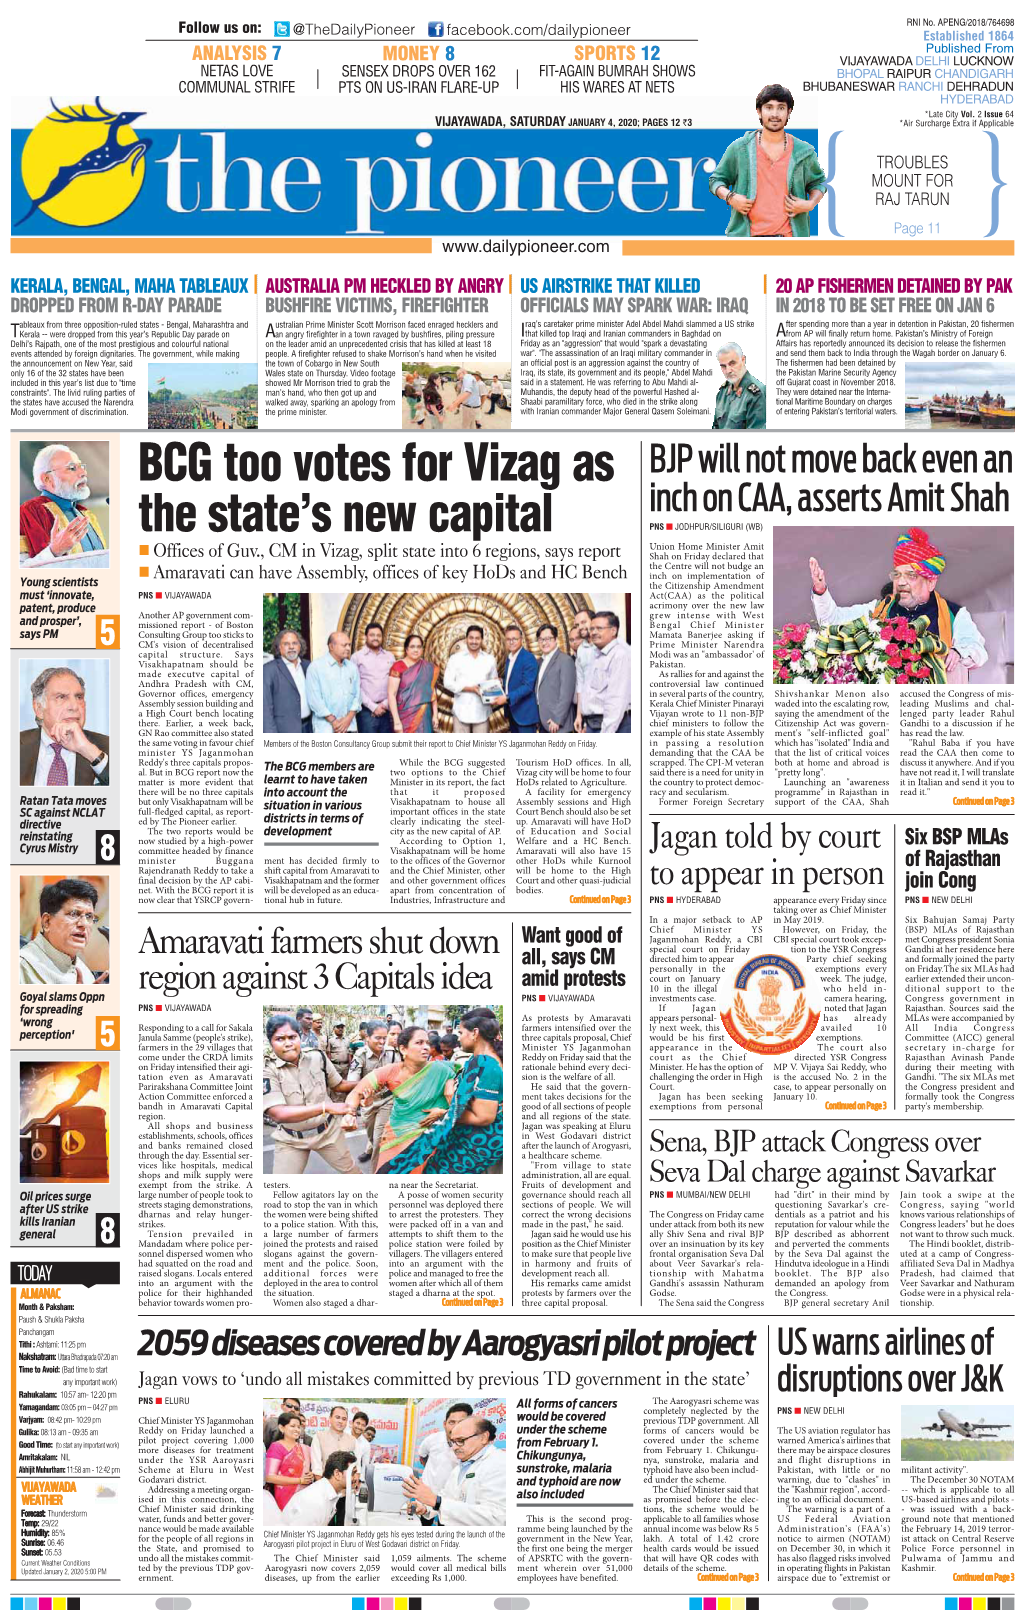 BCG Too Votes for Vizag As the State's New Capital